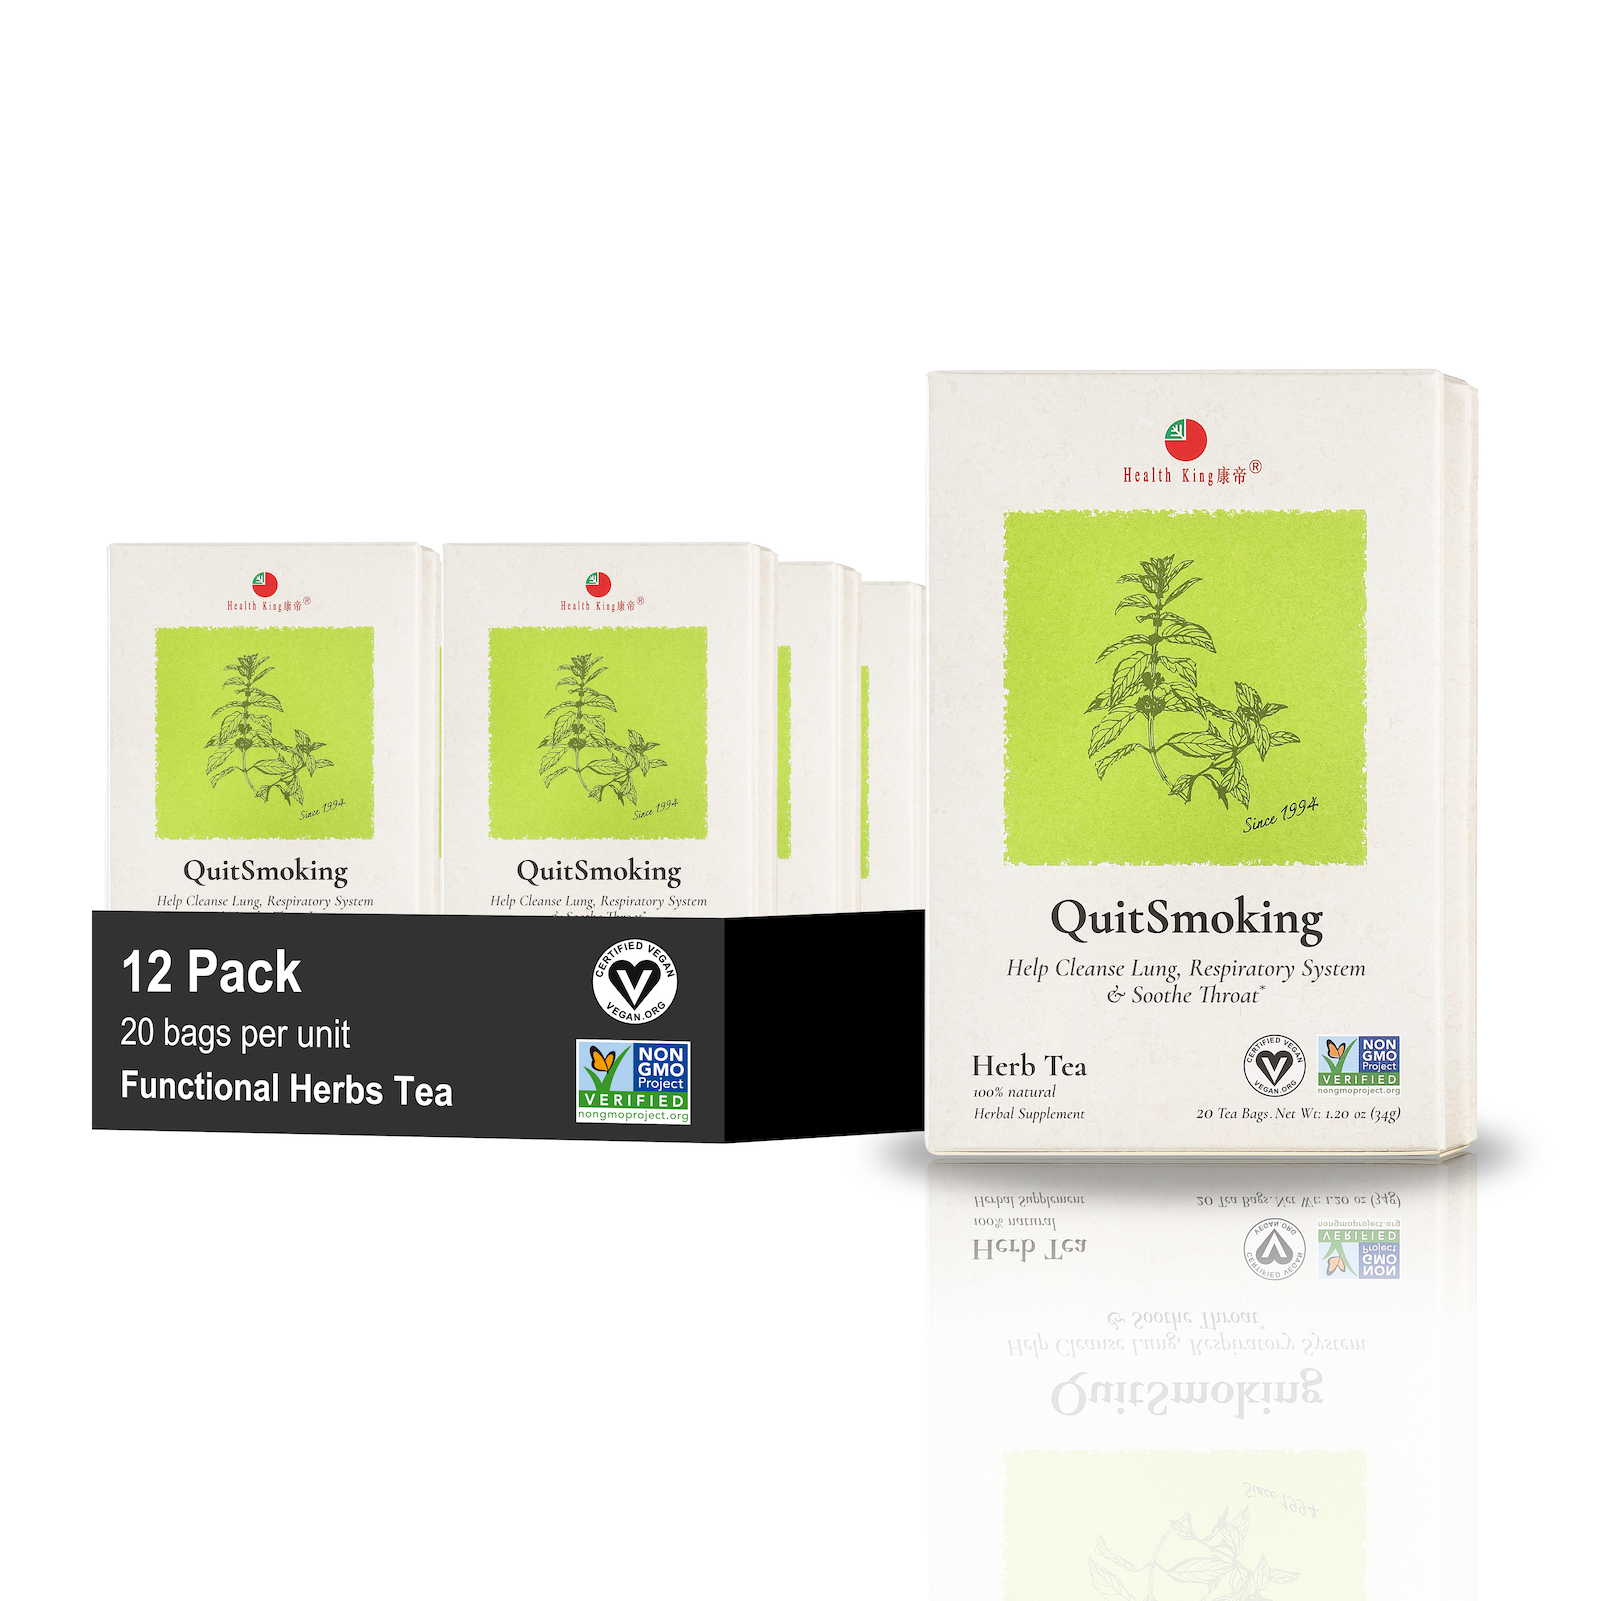 Twelve-pack of Quit Smoking Herb Tea, aimed at cleansing the lungs and respiratory system